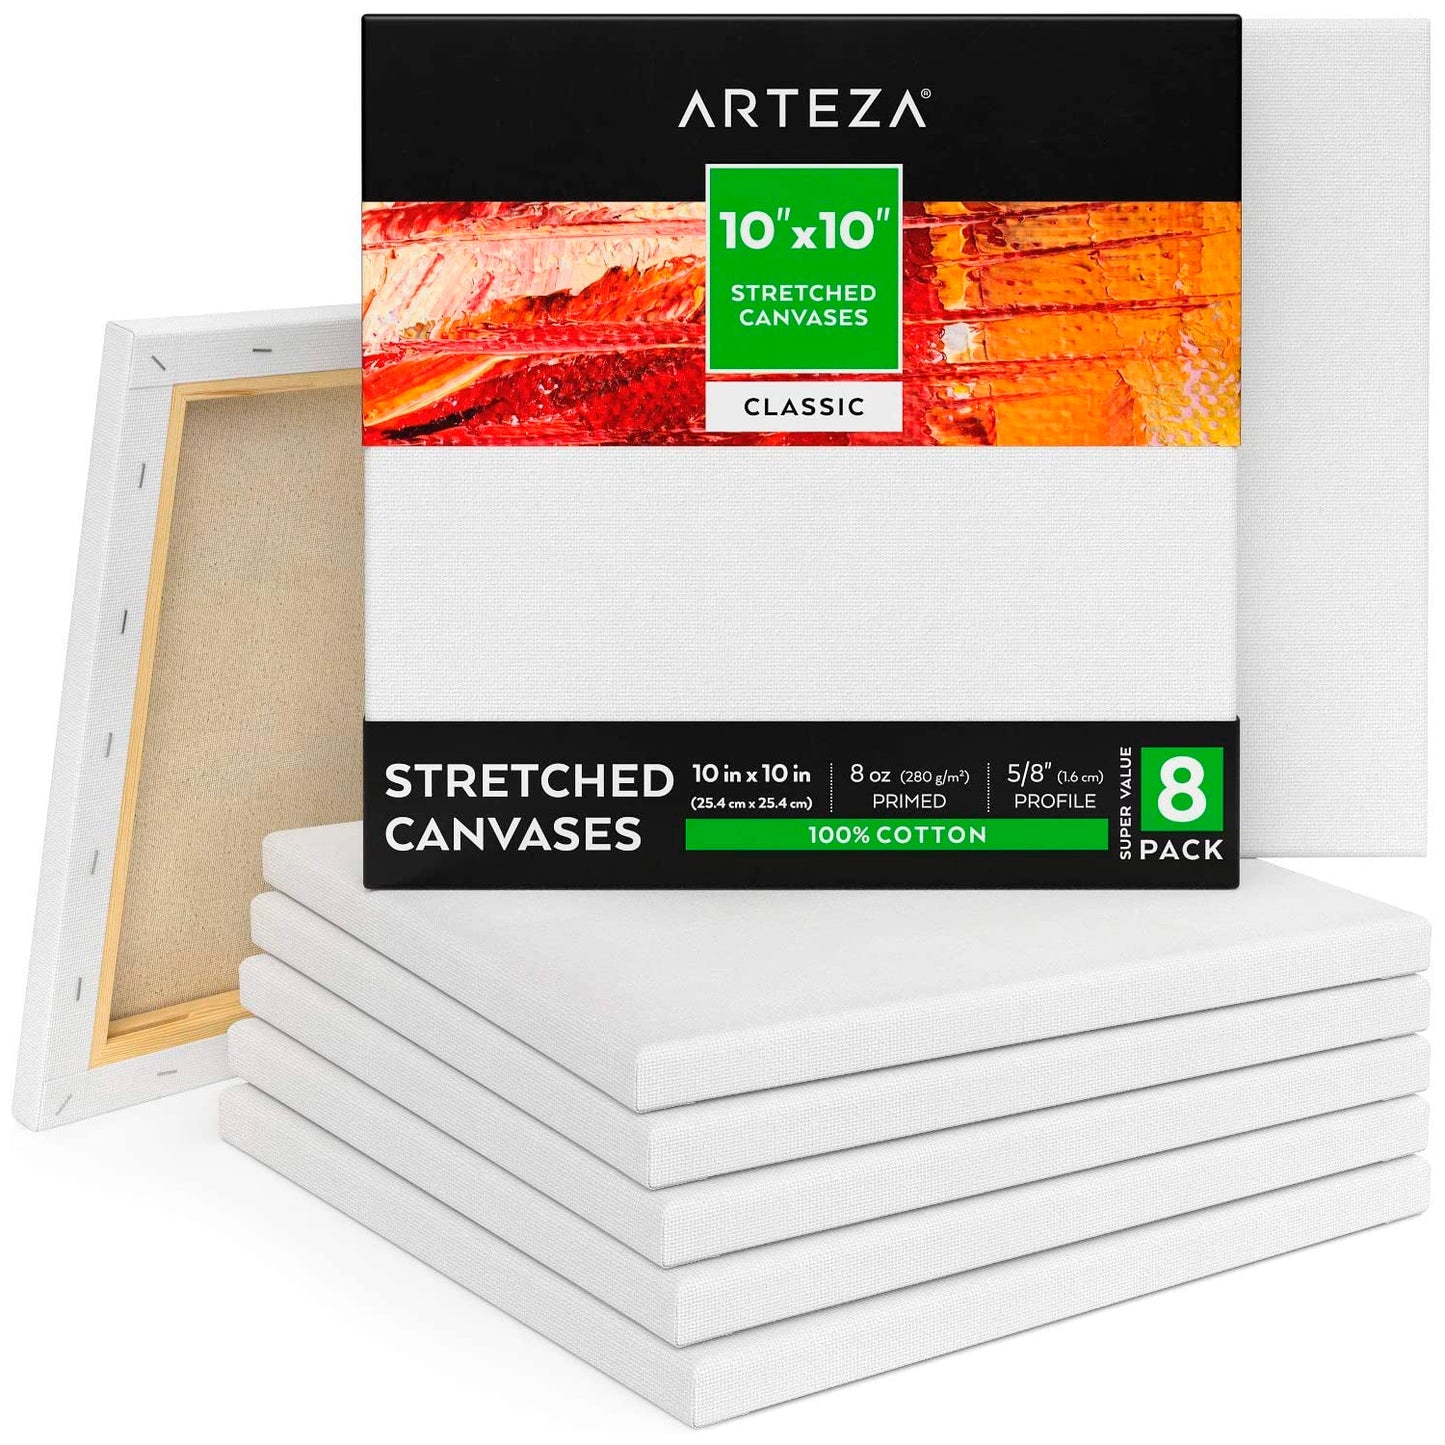 Arteza Stretched Canvas, Classic, White, 10x10, Blank Canvas Boards for Painting - 8 Pack